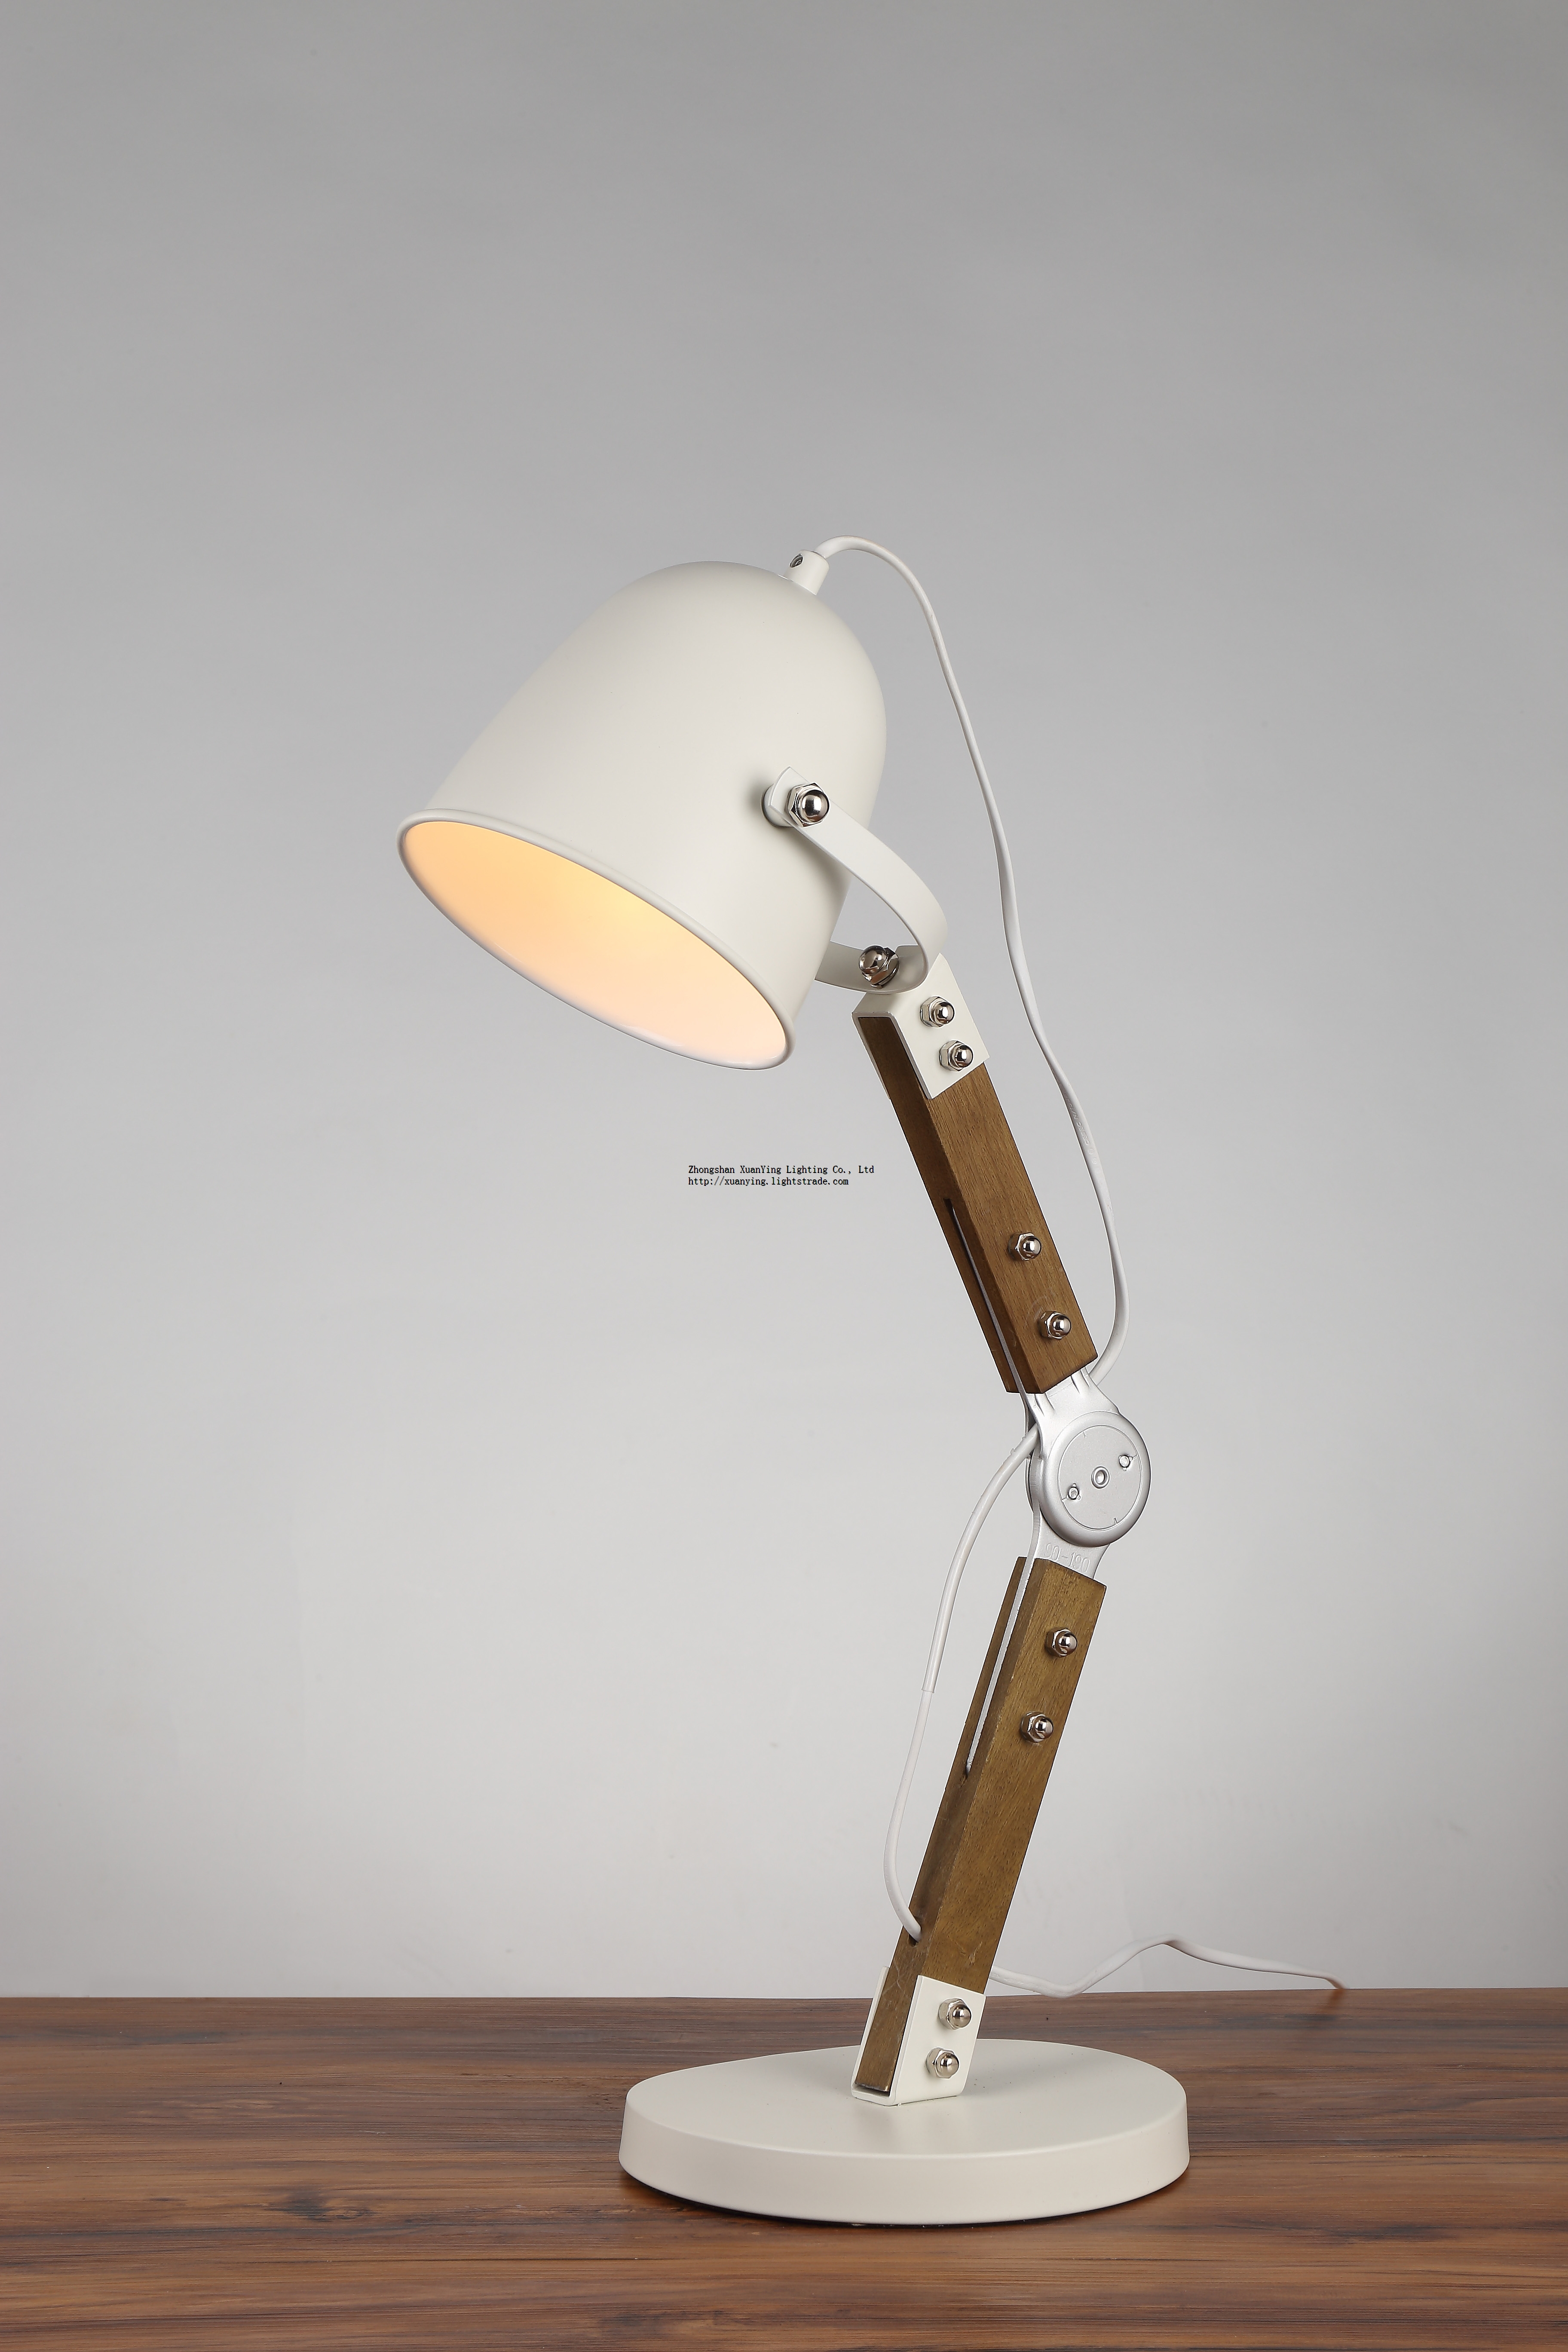 Unique and creative table Lamp Made in China